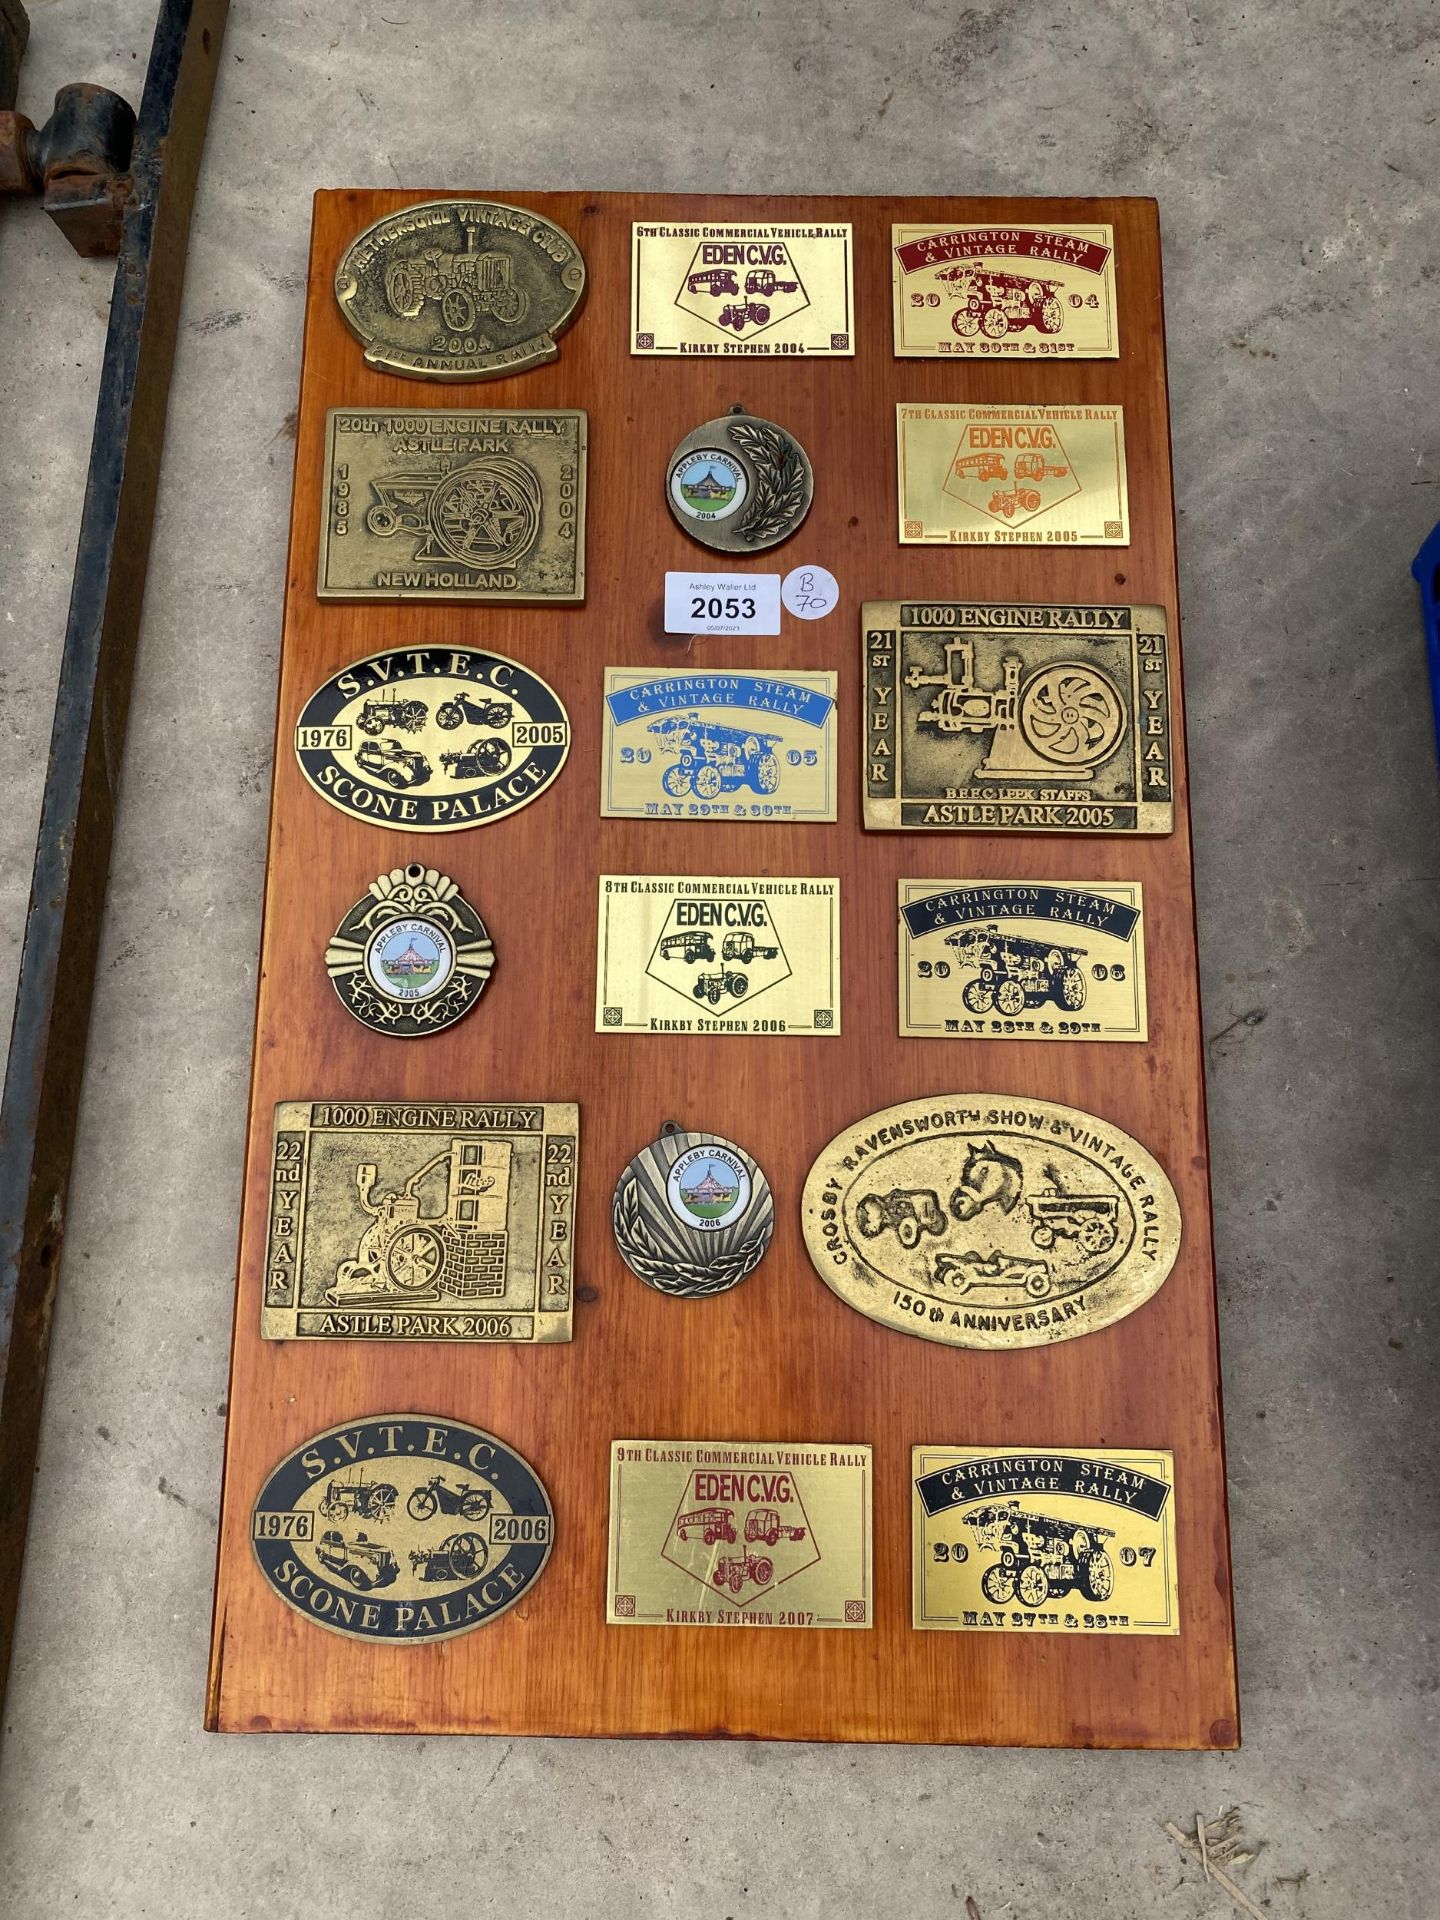 A WOODEN PLAQUE WITH VARIOUS BRASS STEAM RALLY PLAQUES ATTATCHED